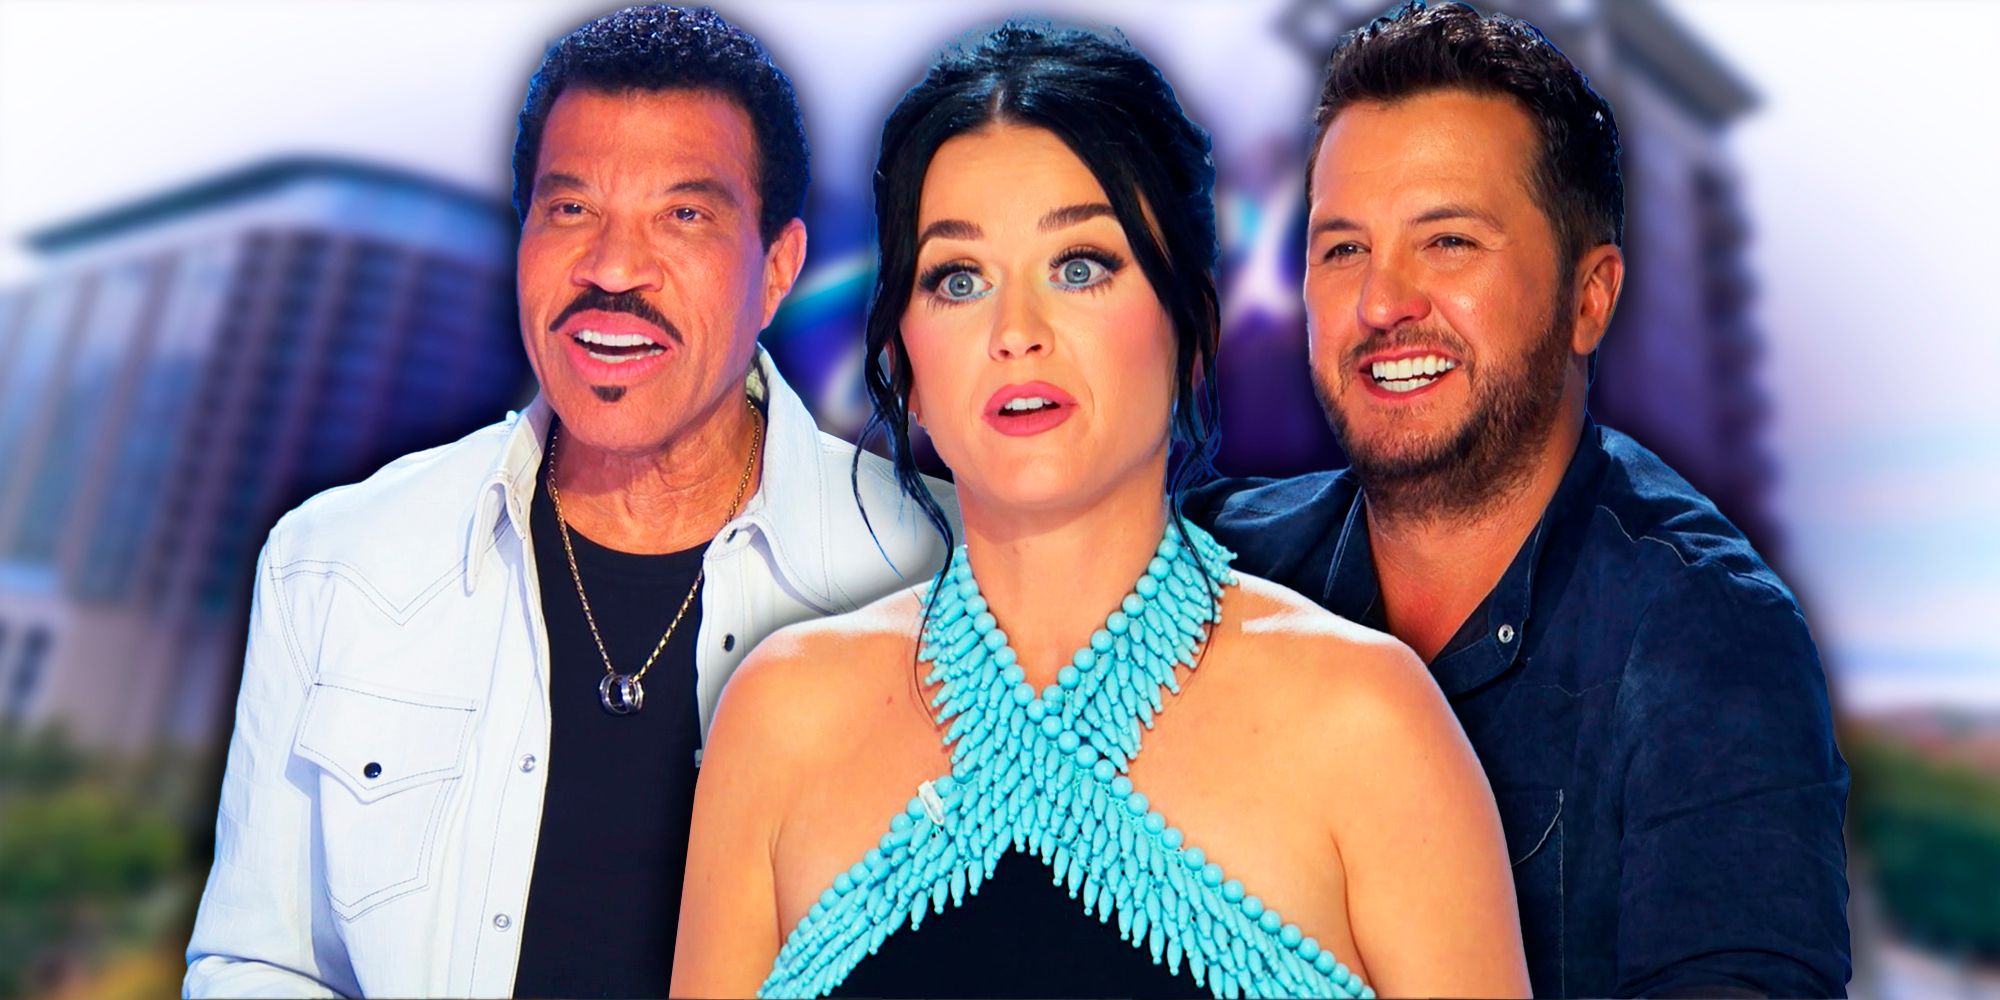 Lionel, Katy, and Luke from American Idol